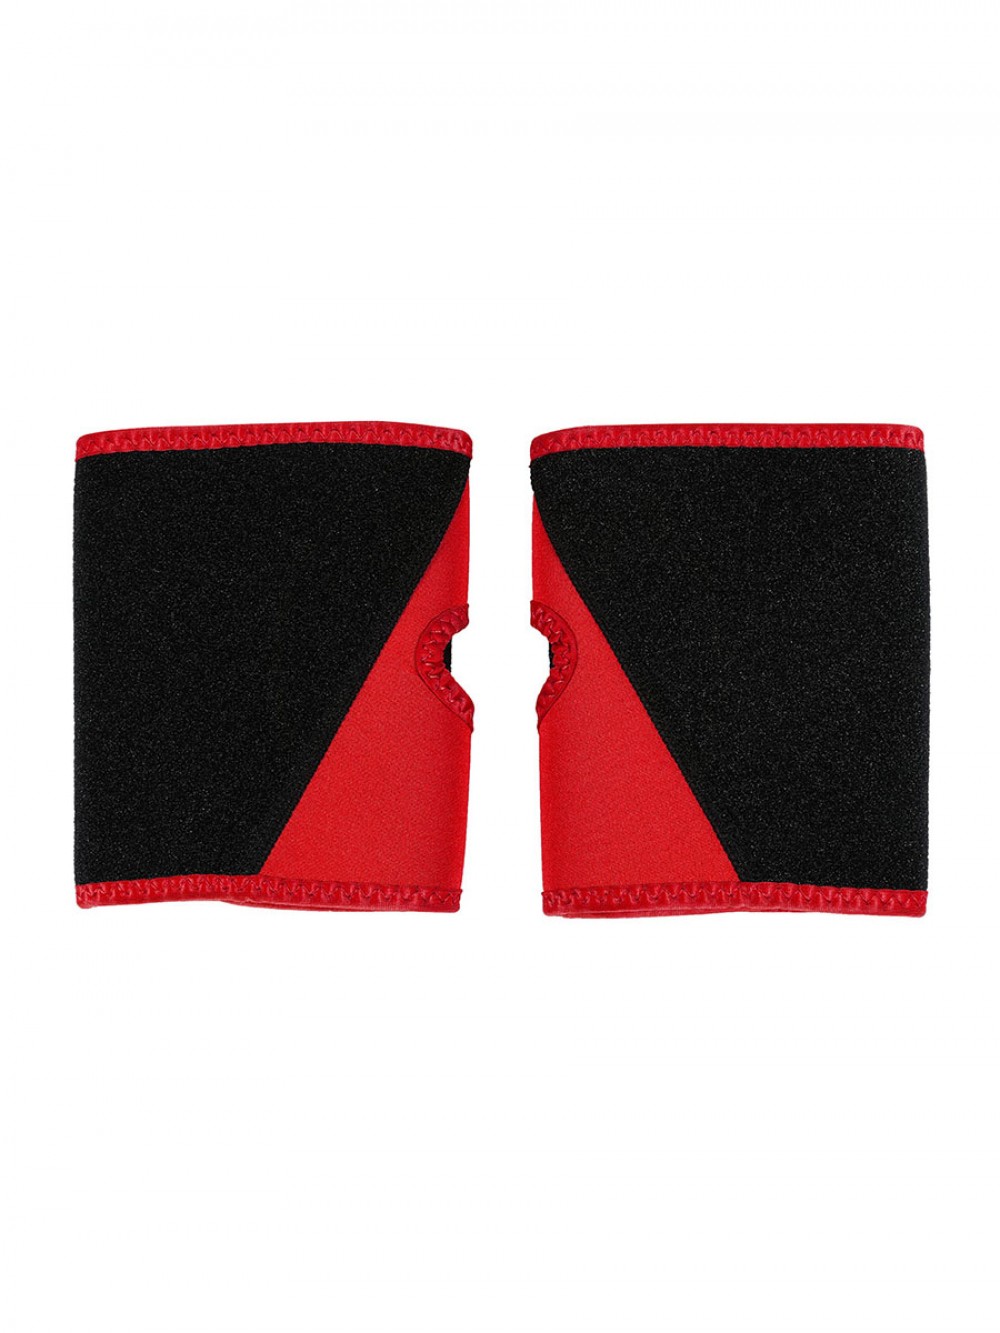 Red 2Pcs Colorblock Neoprene Arm Trimmers For Weight Loss